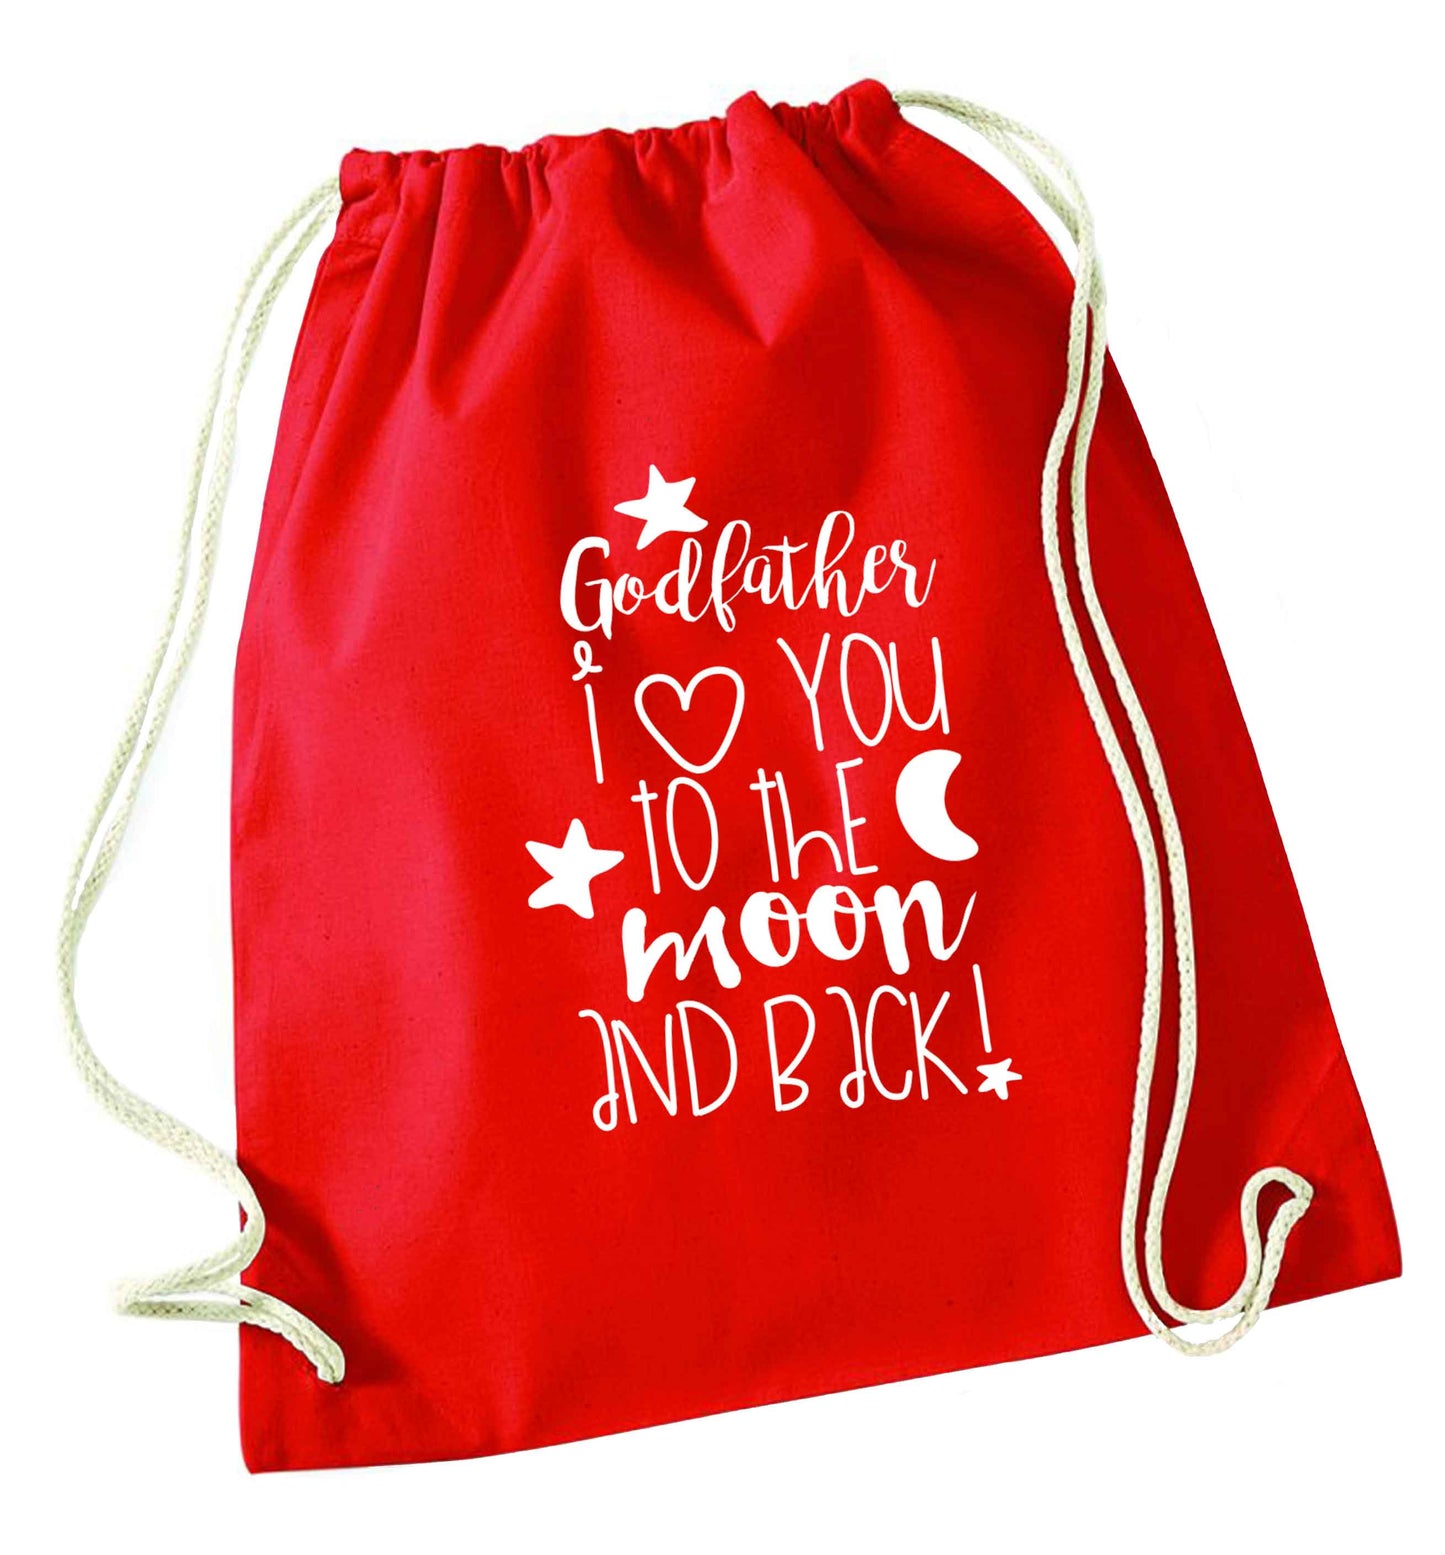 Godfather I love you to the moon and back red drawstring bag 